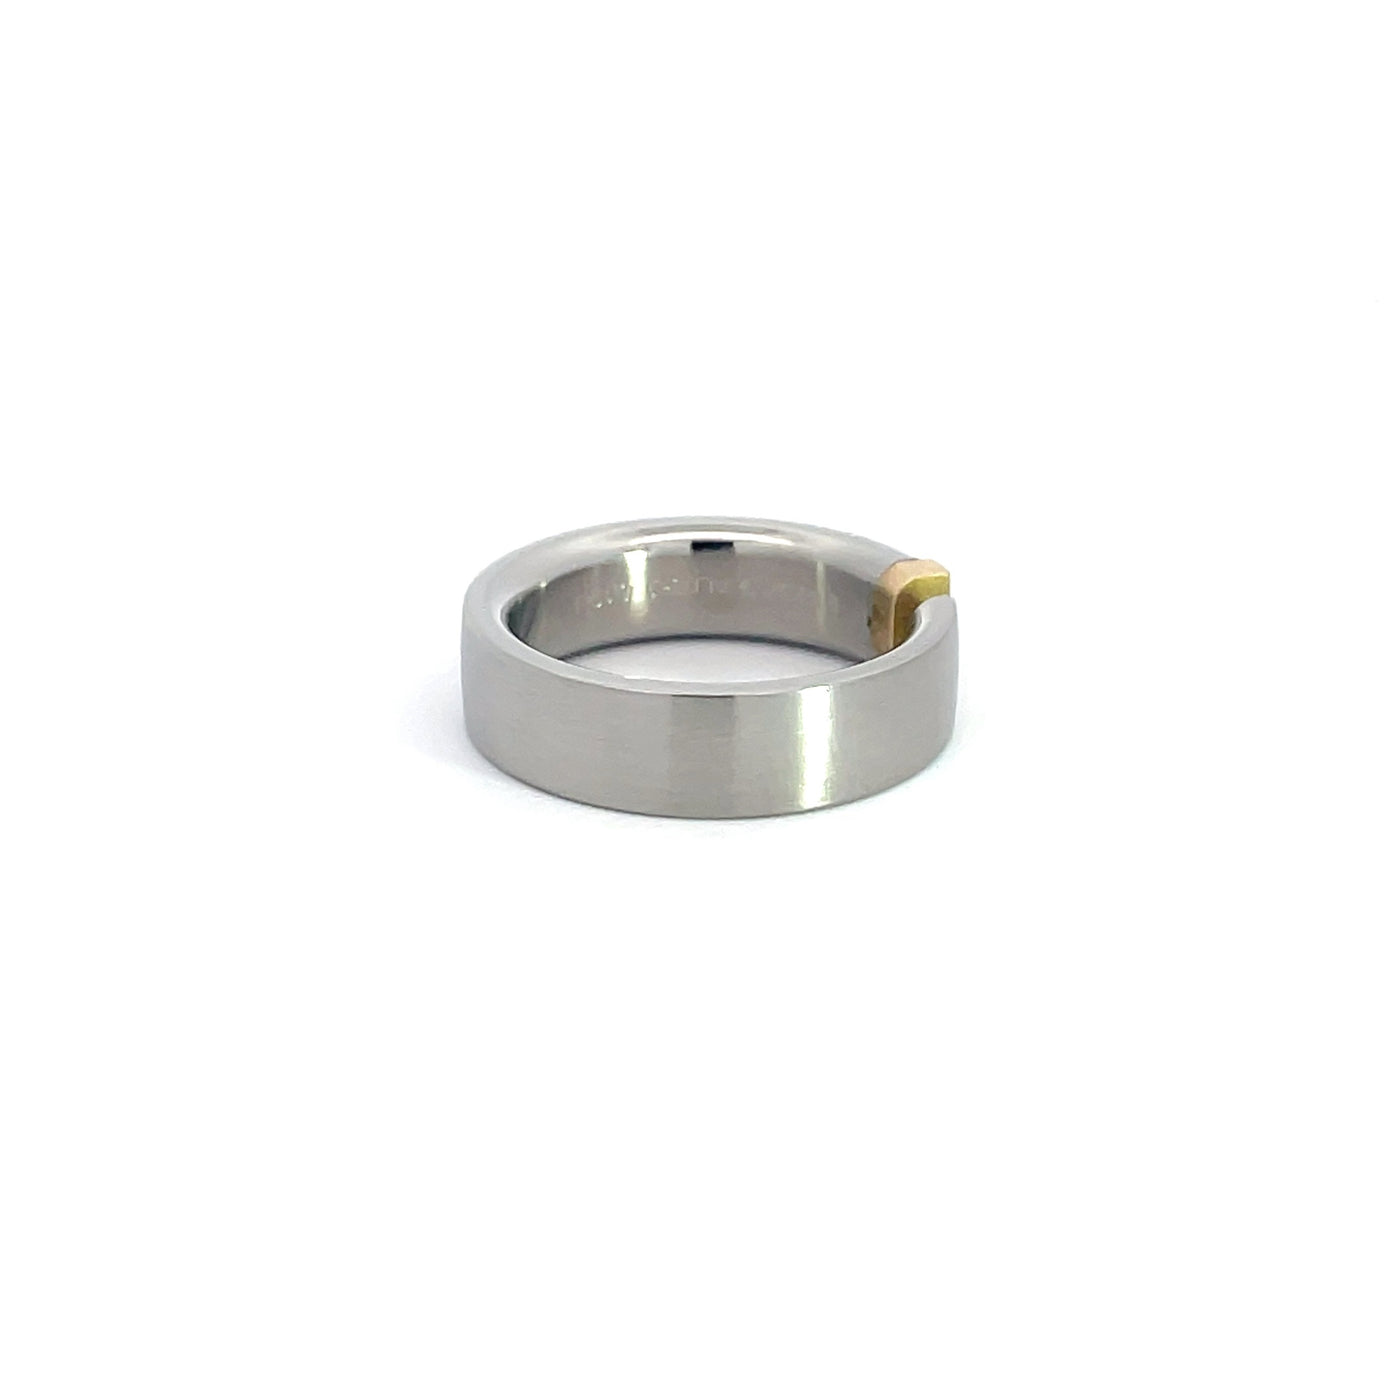 6mm Stainless Steel Tension Set Diamond Ring Size N 1/2